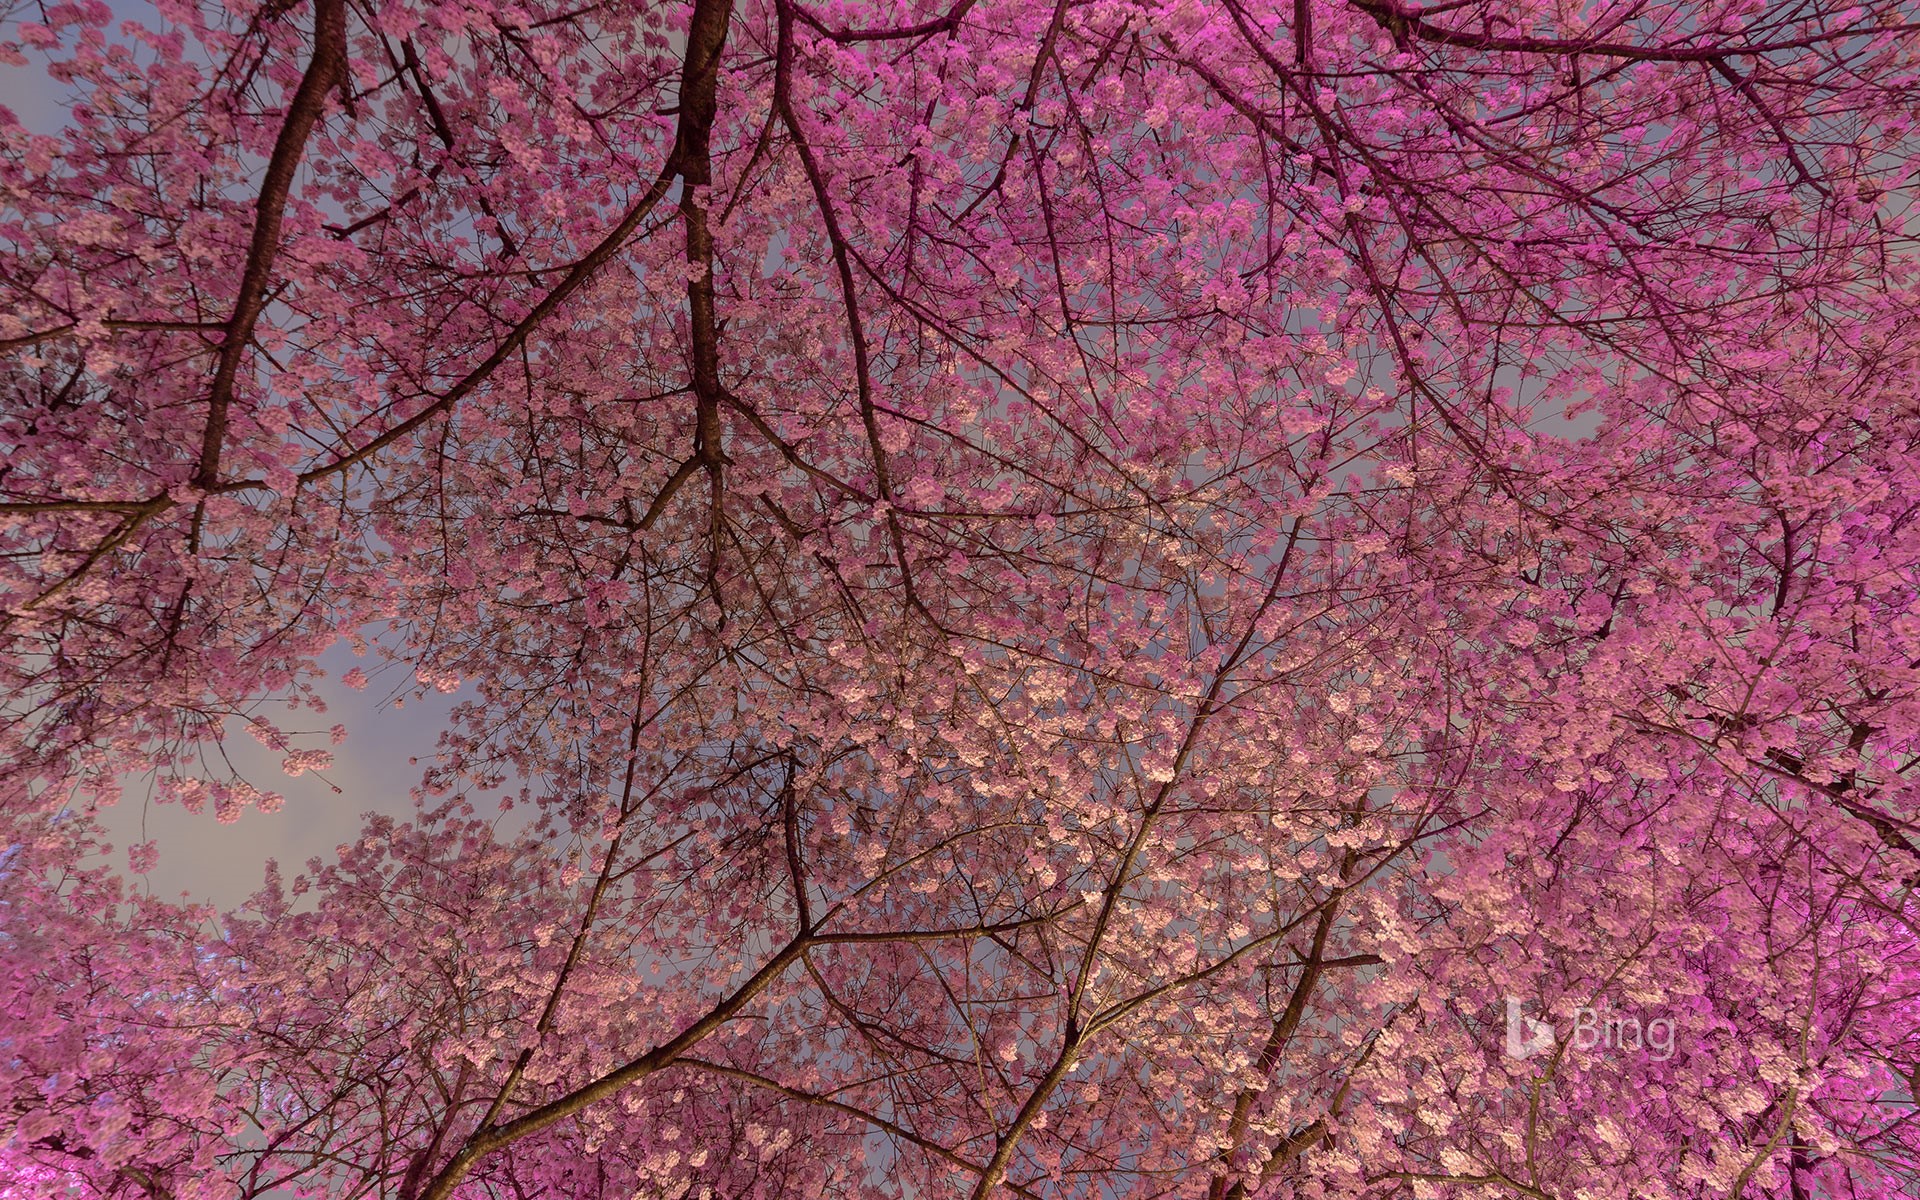 Blooming cherry trees in Vancouver, B.C., Canada